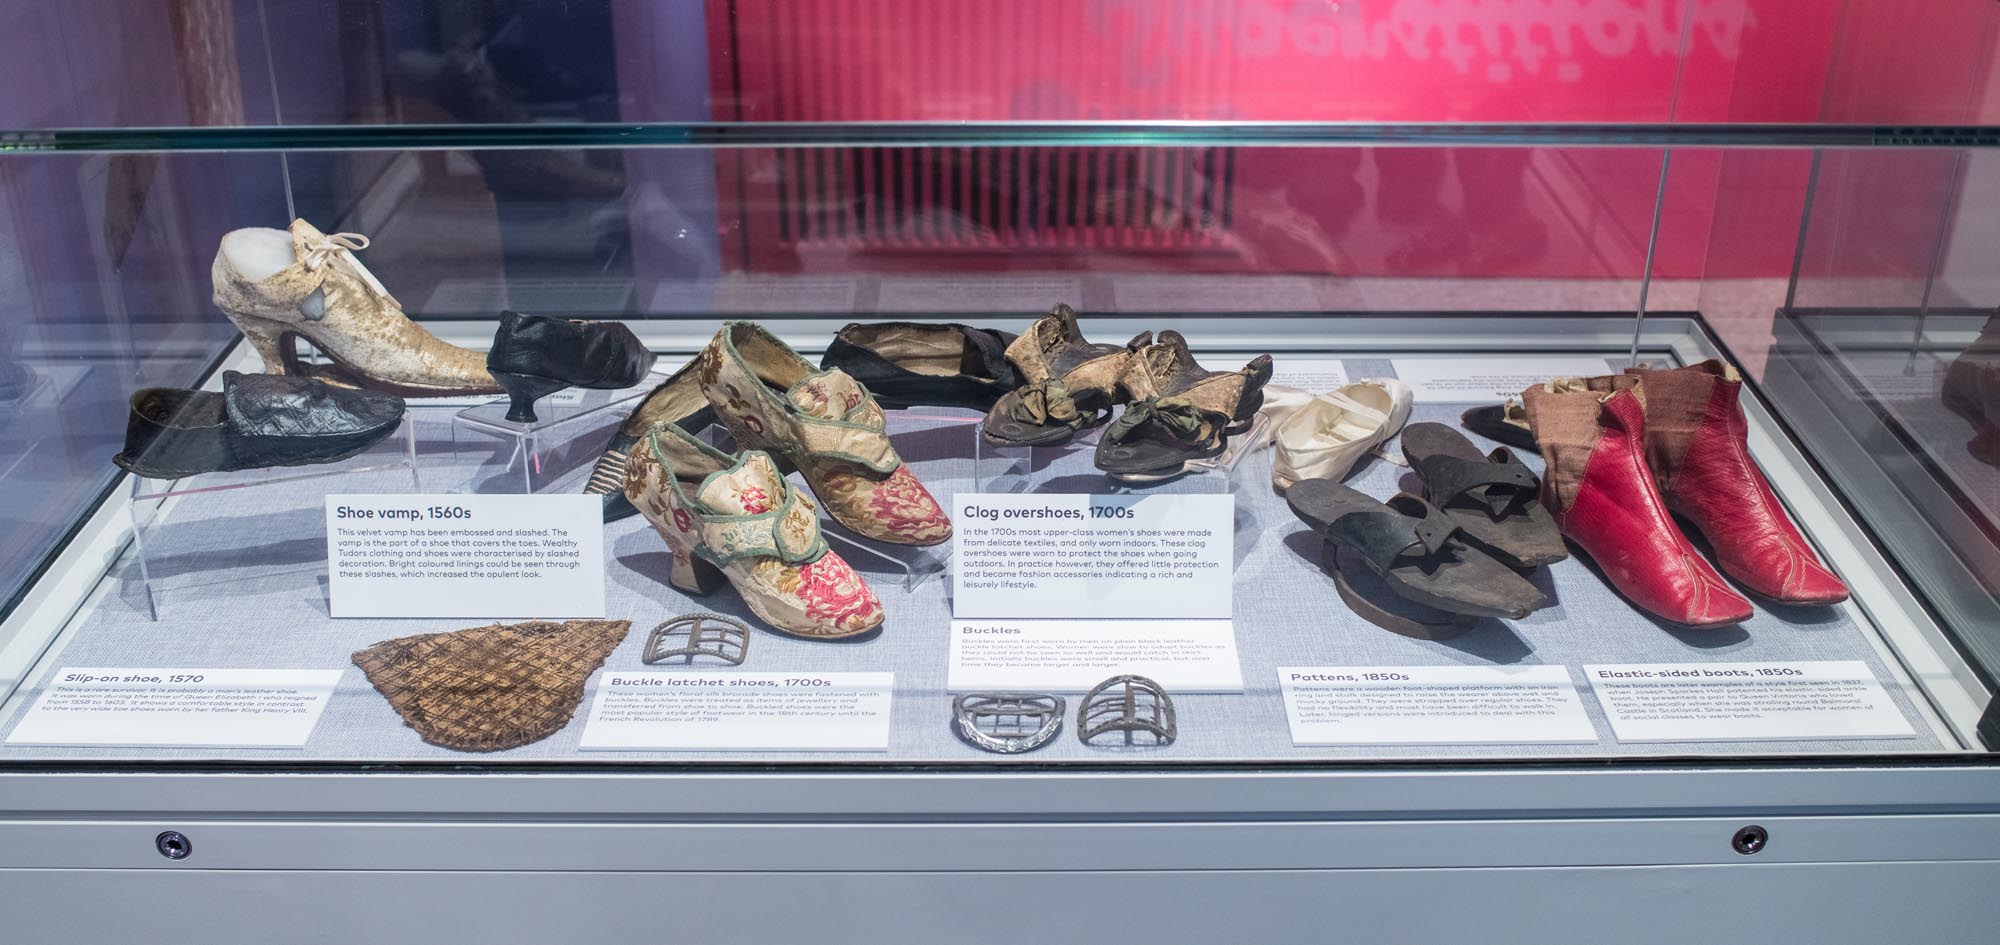 Shoes from the last 400 years on display